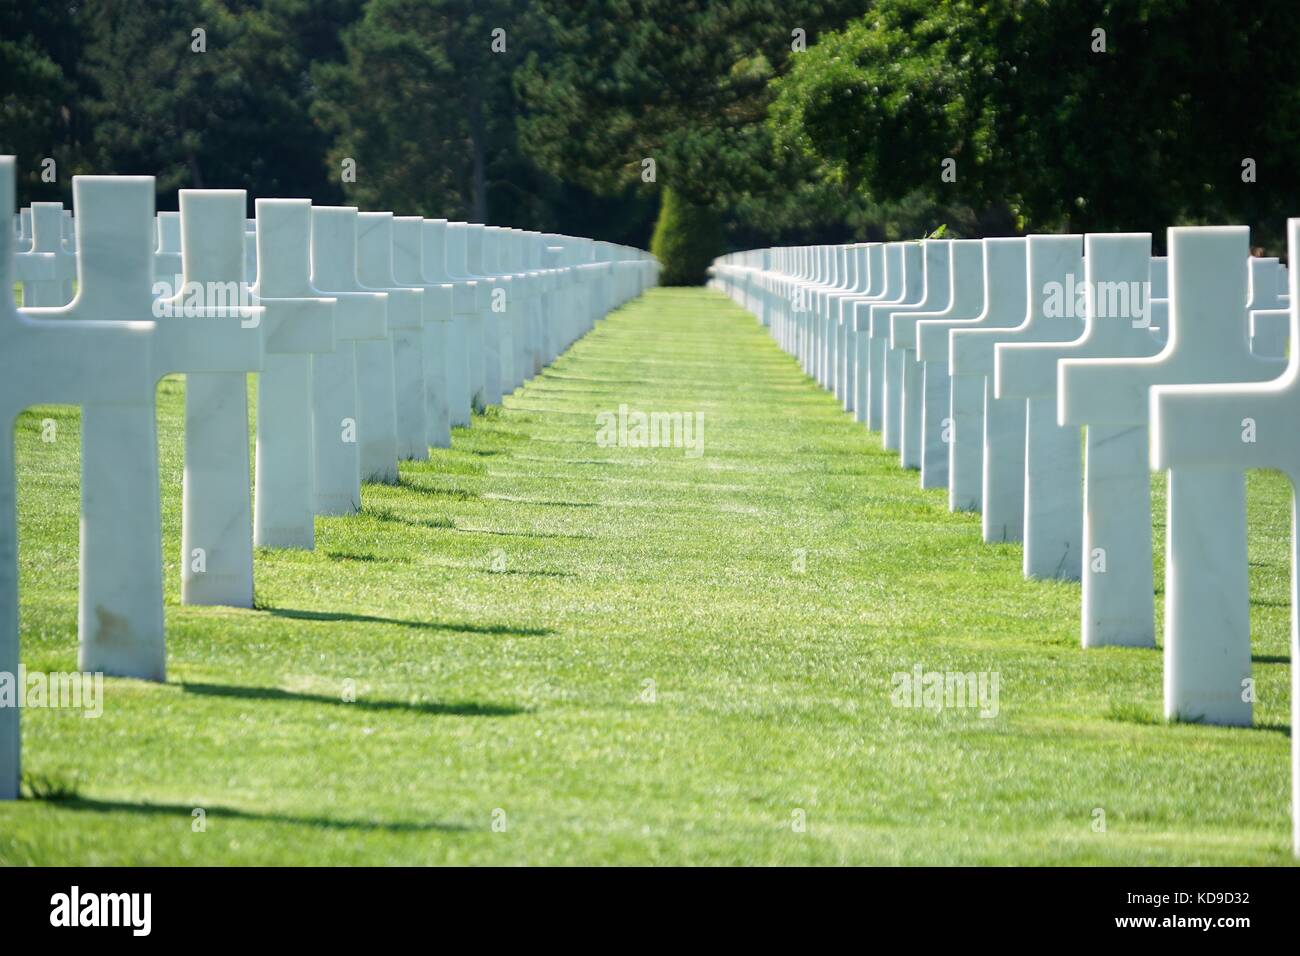 World War 2 memorial white crosses on grass with trees in background Stock Photo